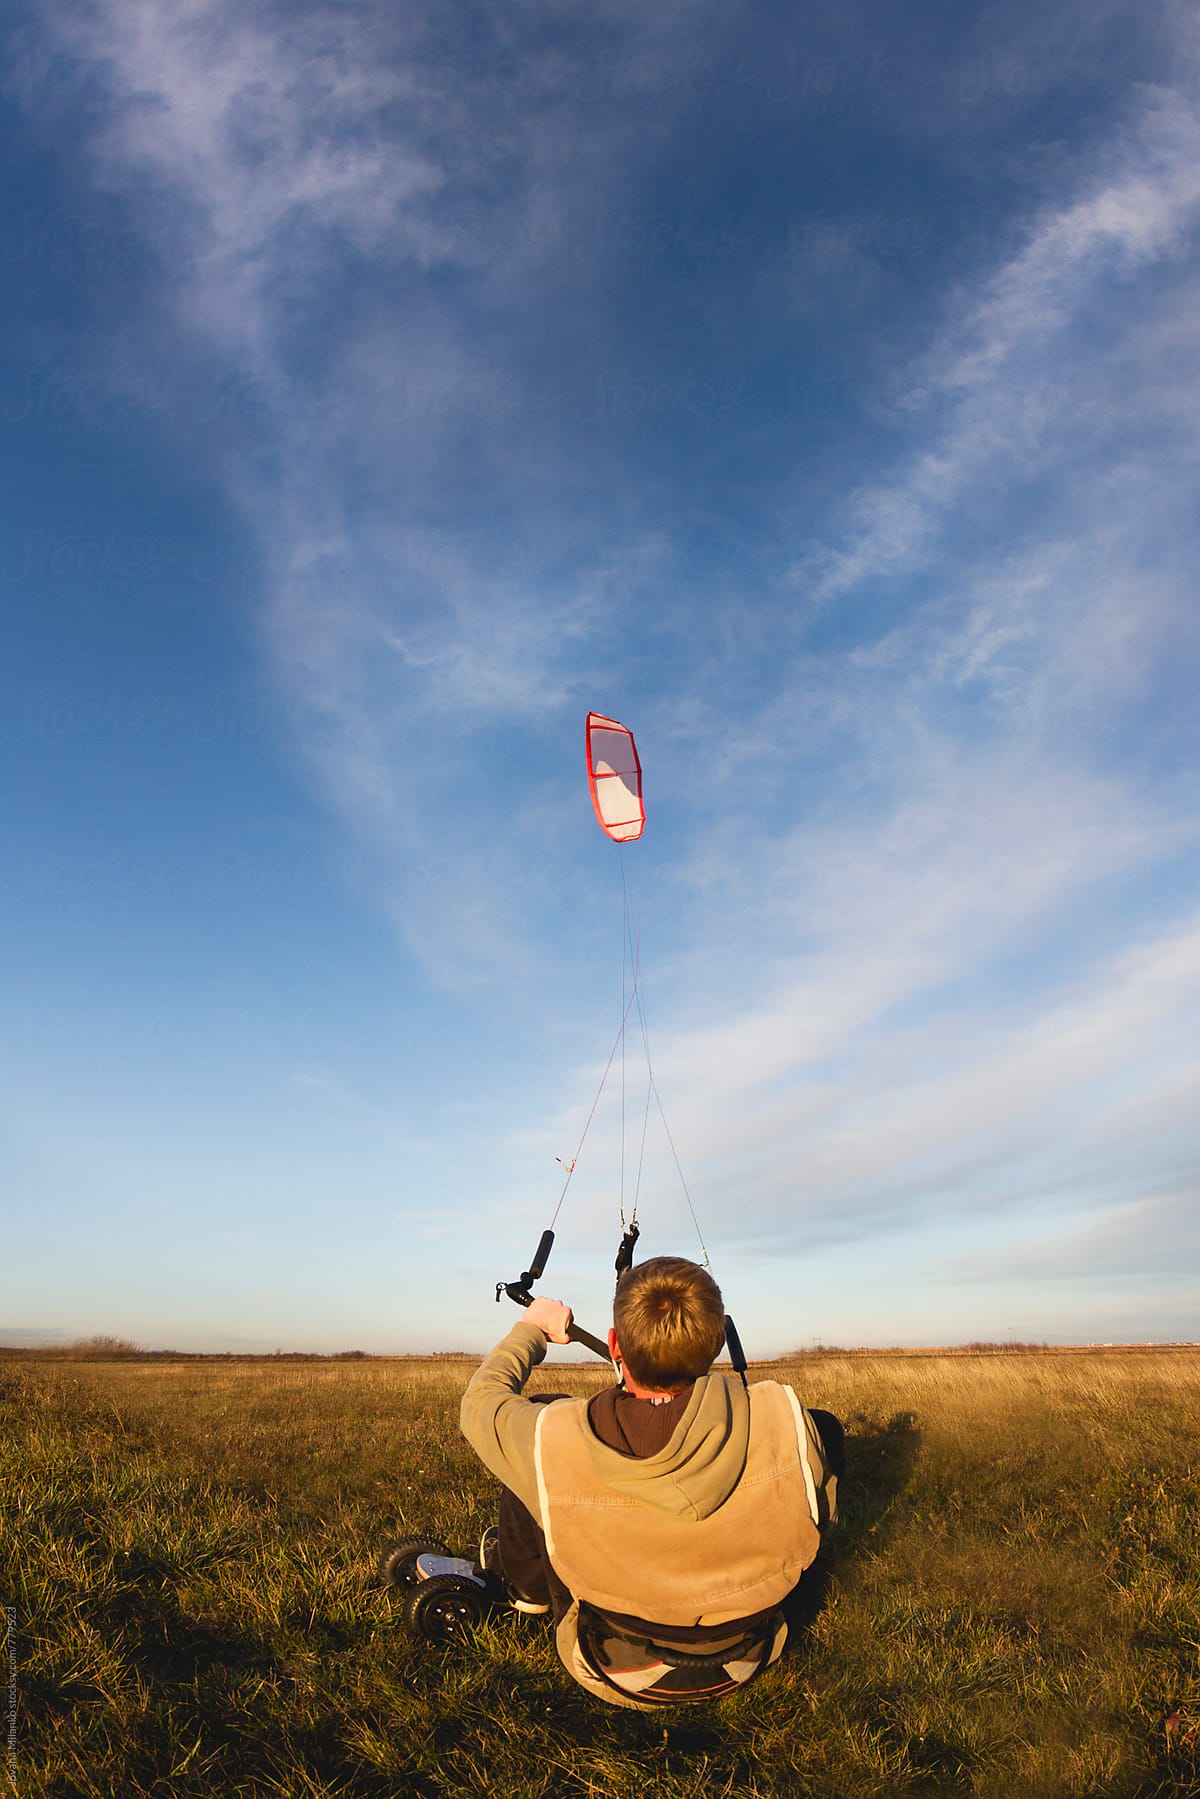 Young man kiteboarding in the field at sunset